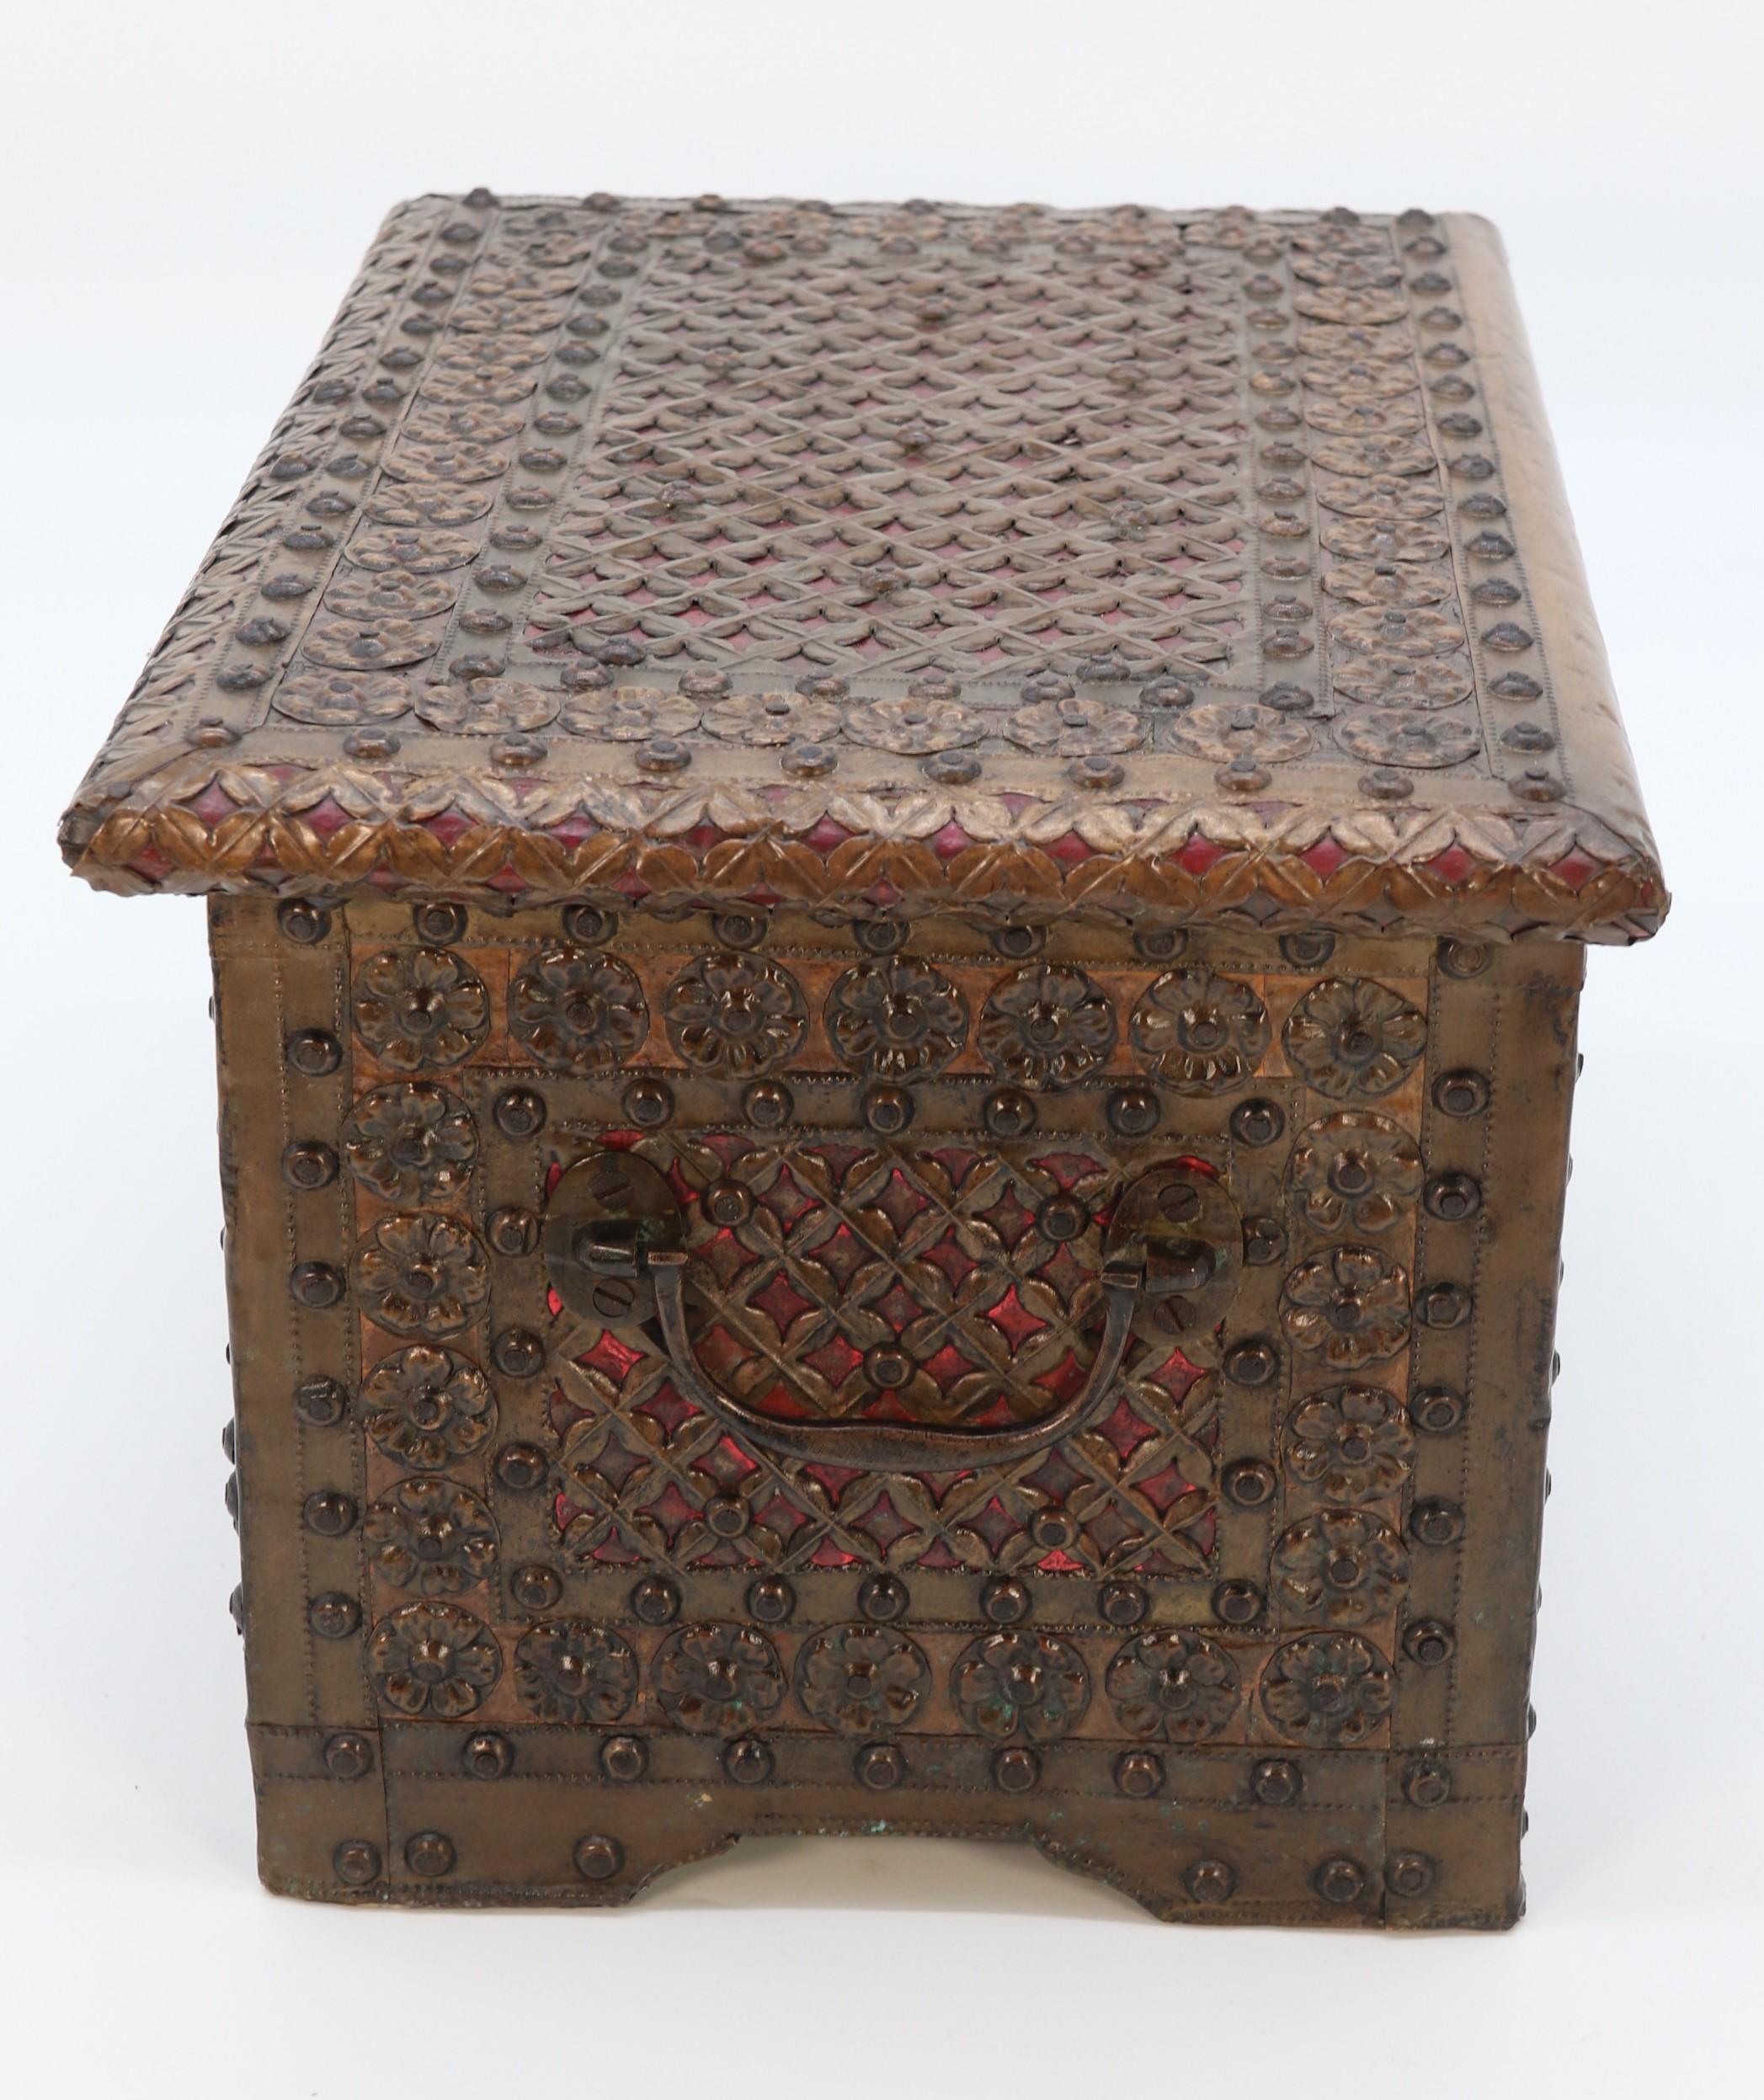 Hand-Crafted Antique decorative small Zanzibar brass and copper mounted chest or strongbox For Sale